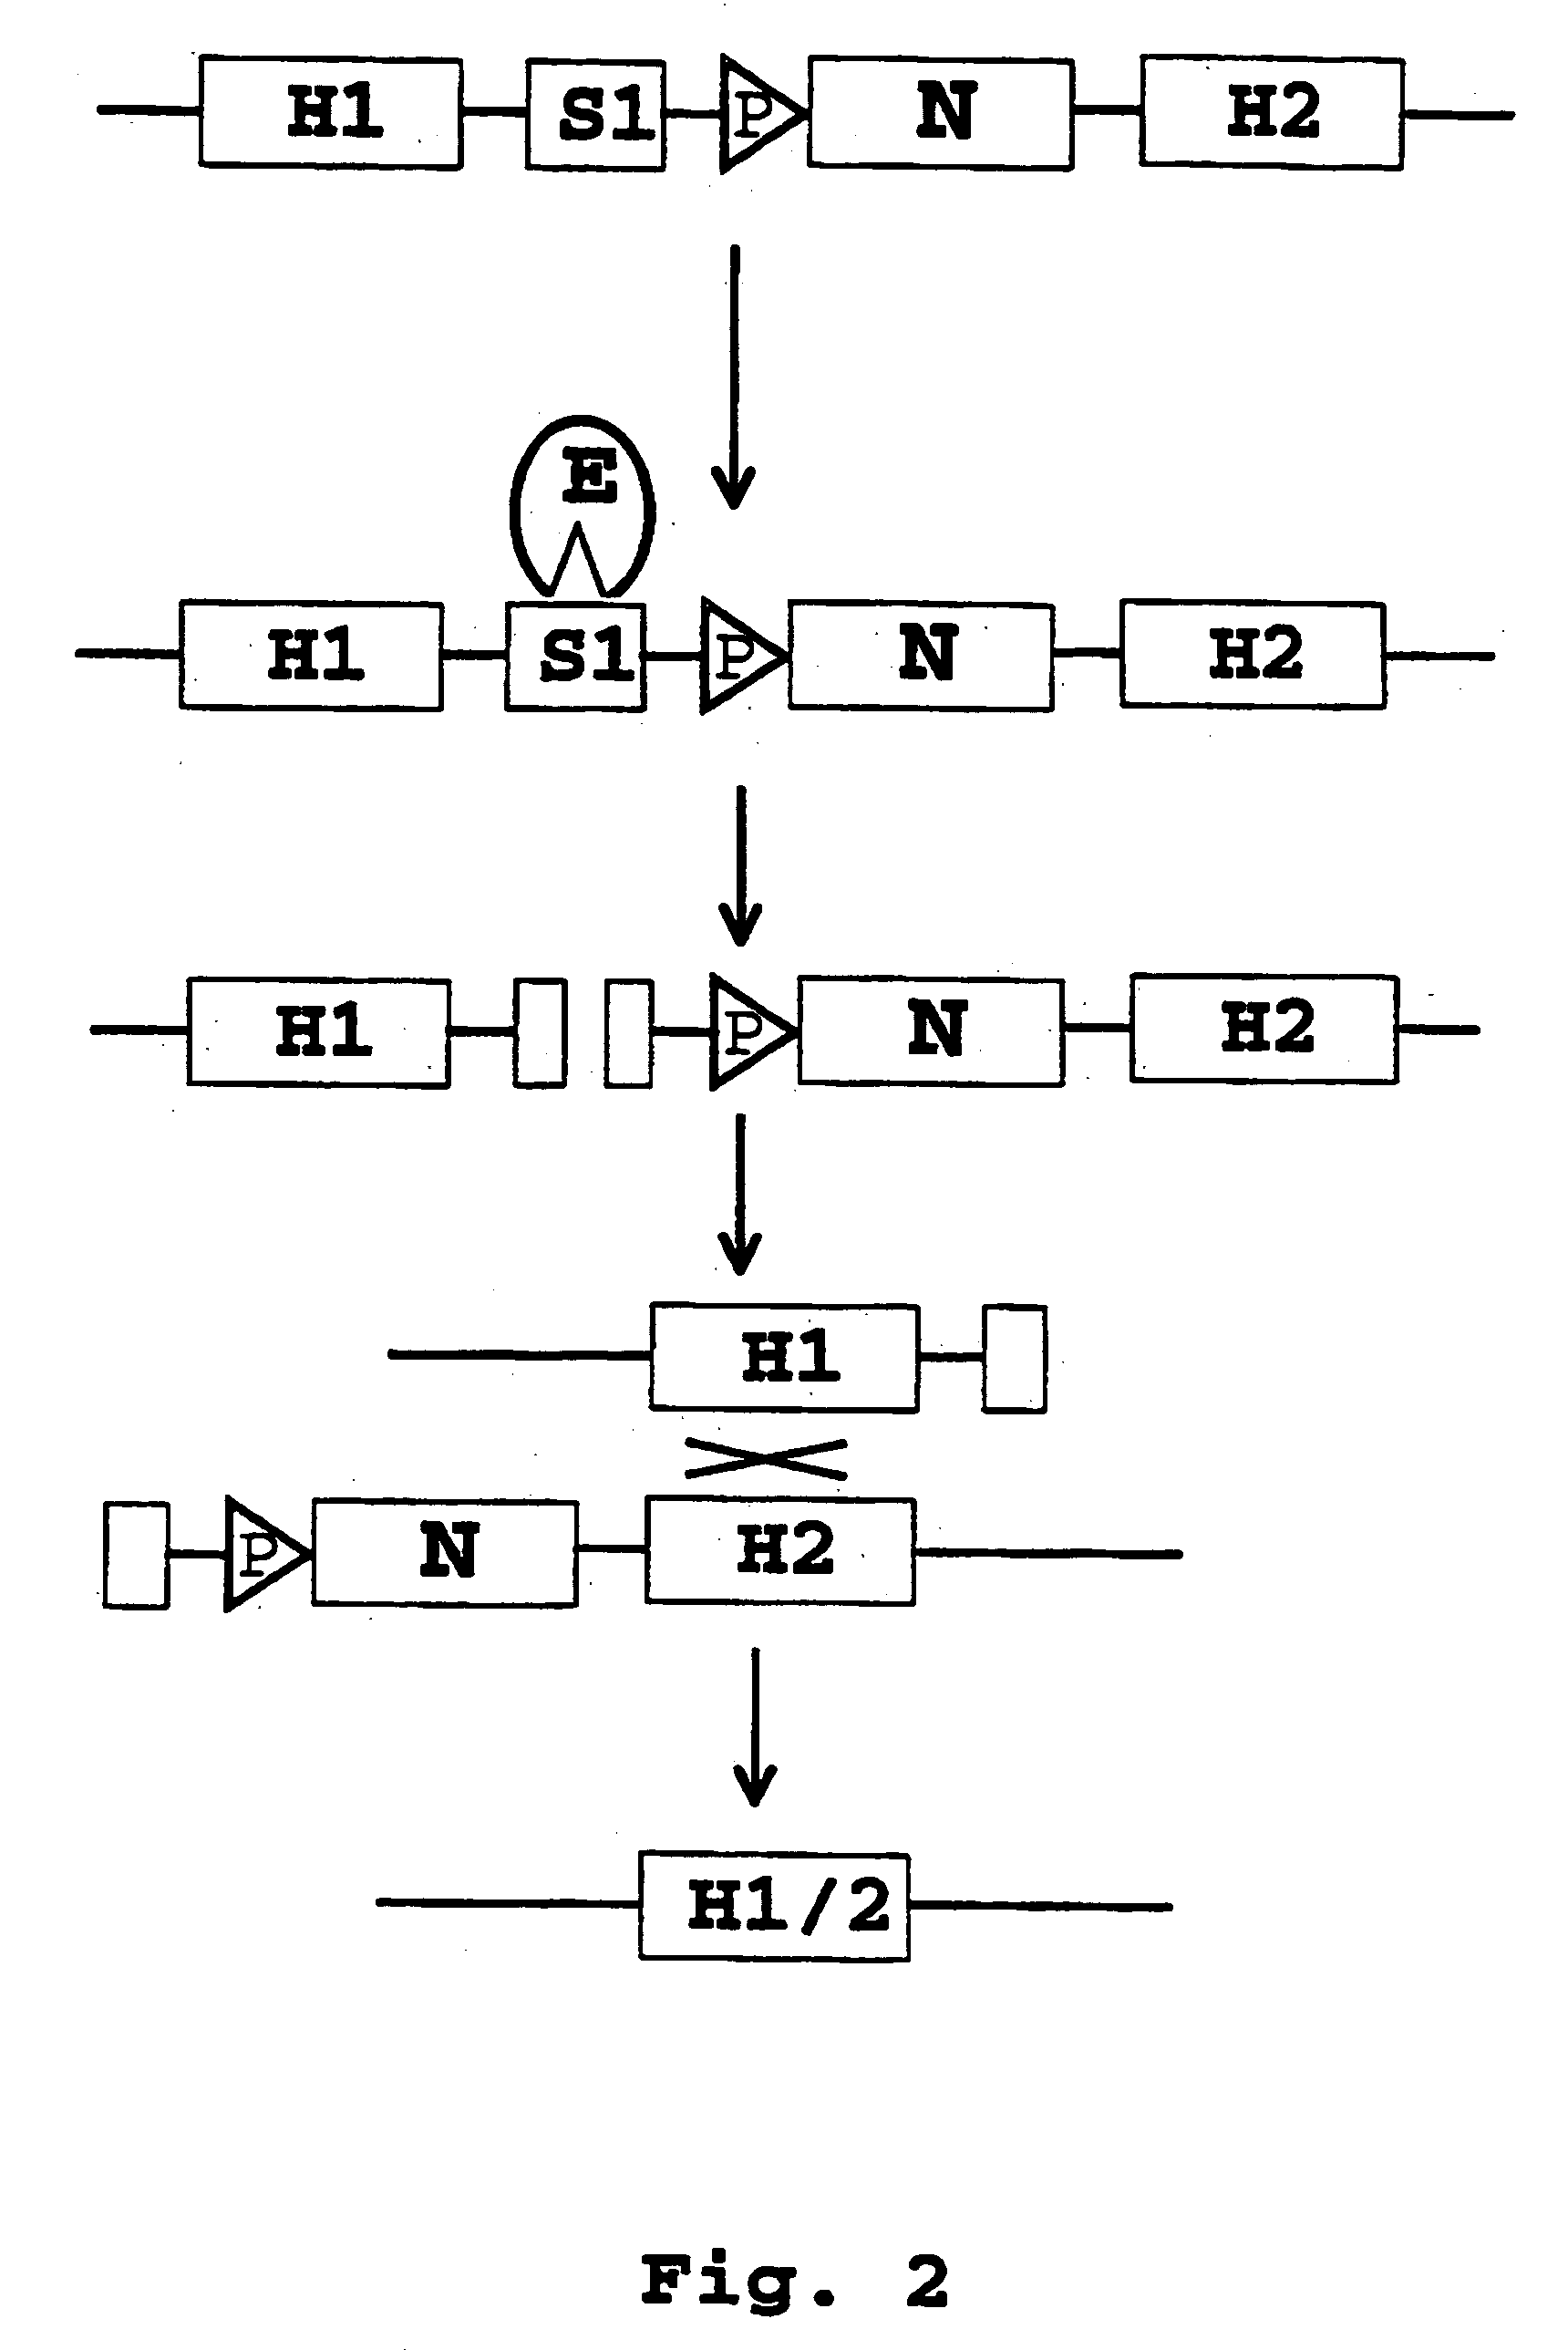 Recombination systems and methods for eliminating nucleic acid sequences from the genome of eukaryotic organisms